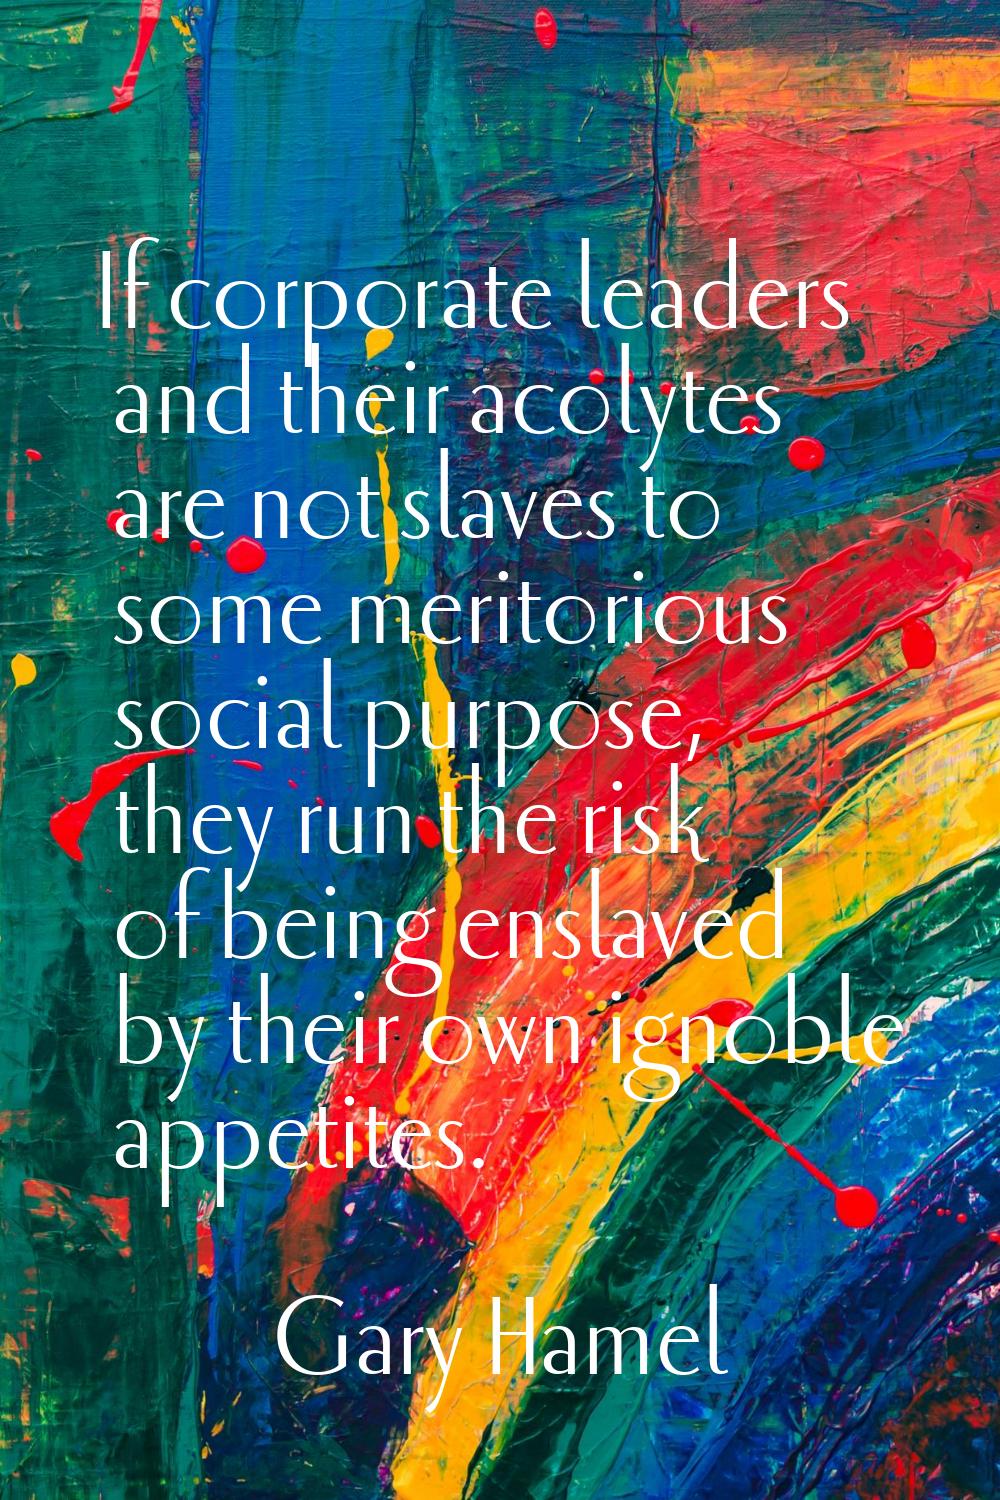 If corporate leaders and their acolytes are not slaves to some meritorious social purpose, they run